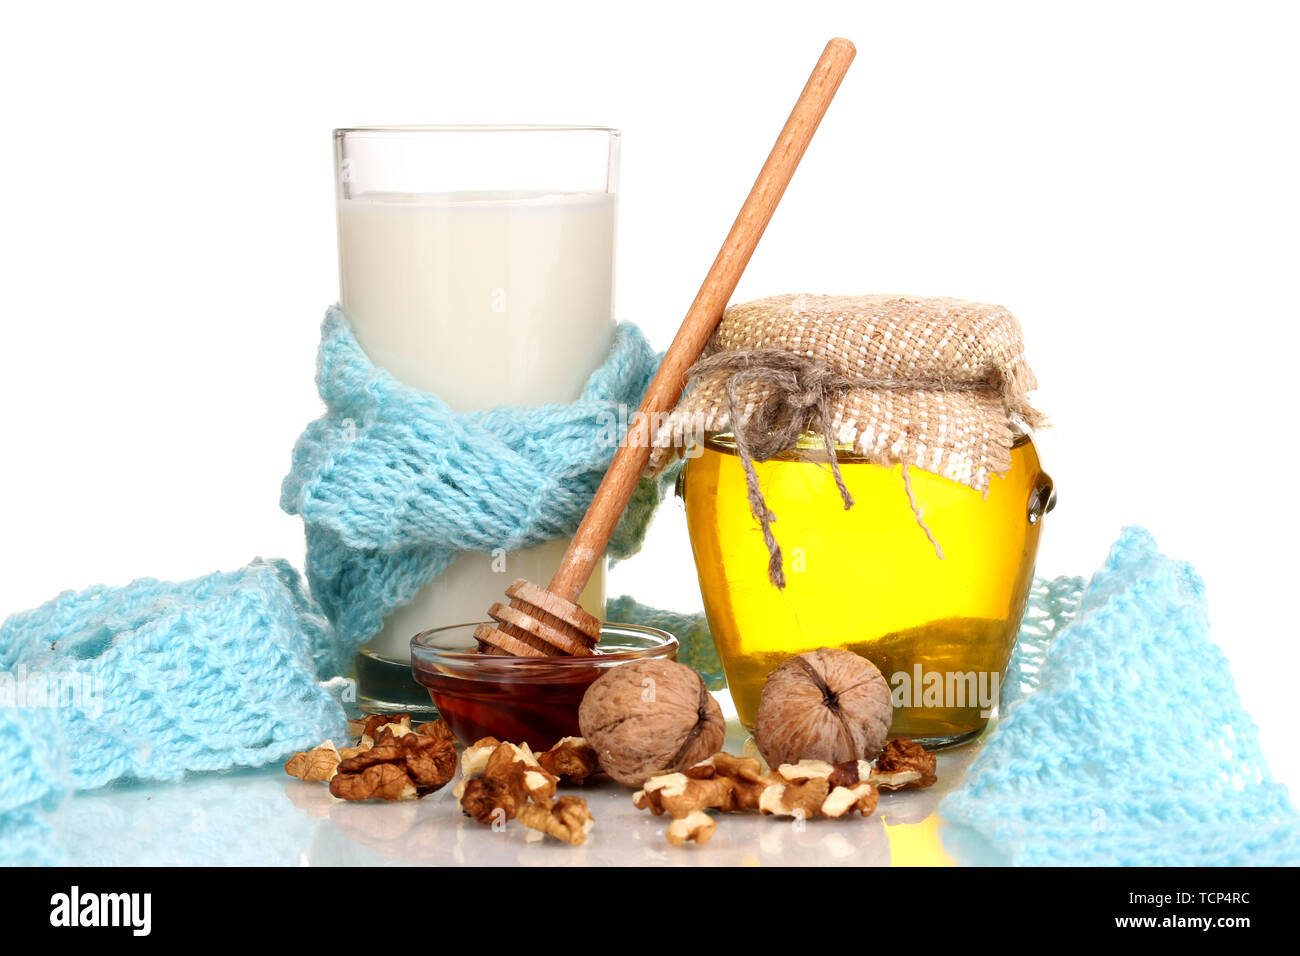 Healthy ingredients for strengthening immunity on warm scarf isolated on white Stock Photo